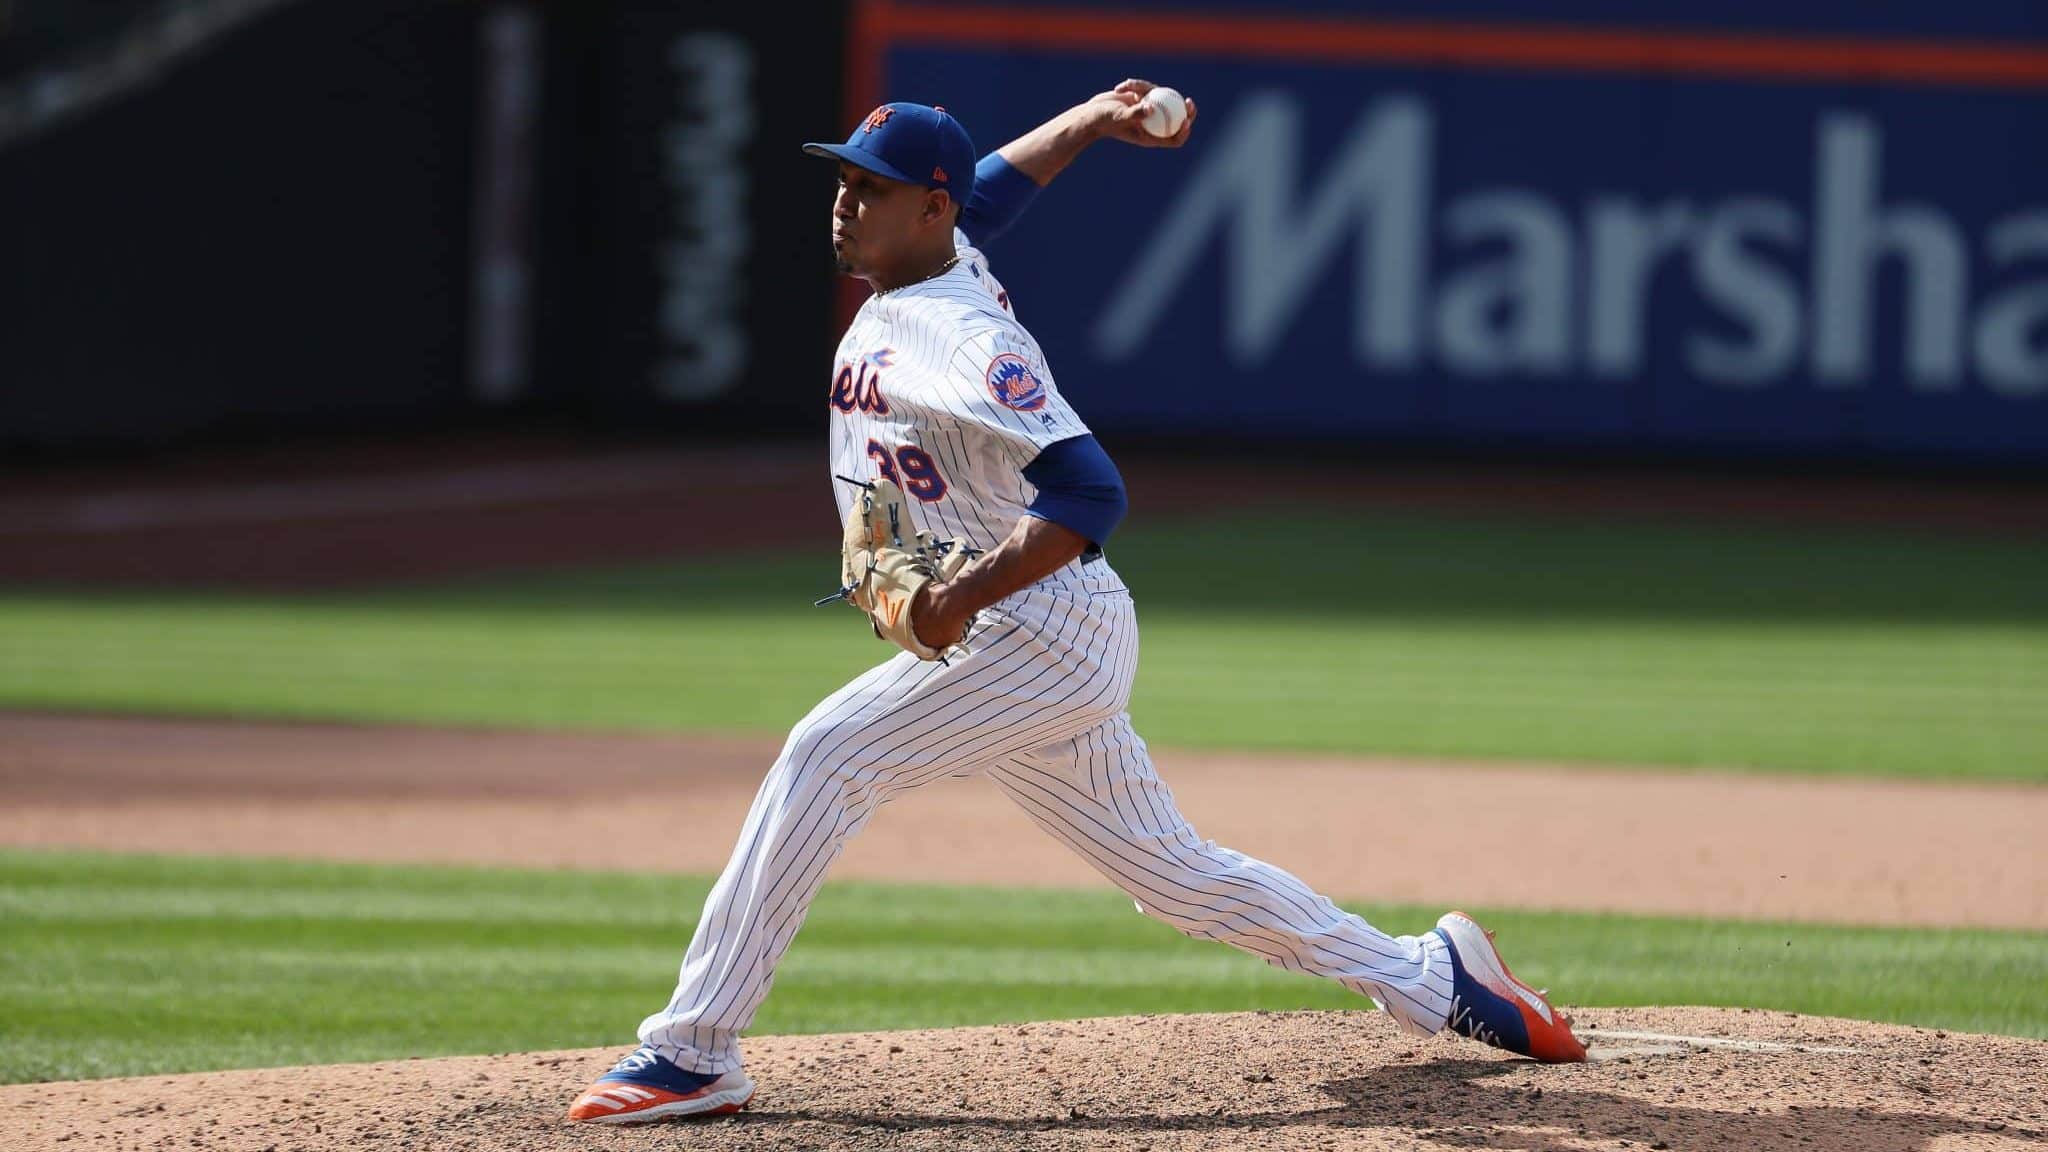 NEW YORK, NEW YORK - AUGUST 11: Edwin Diaz #39 of the New York Mets pitches against the Washington Nationals during their game at Citi Field on August 11, 2019 in New York City.